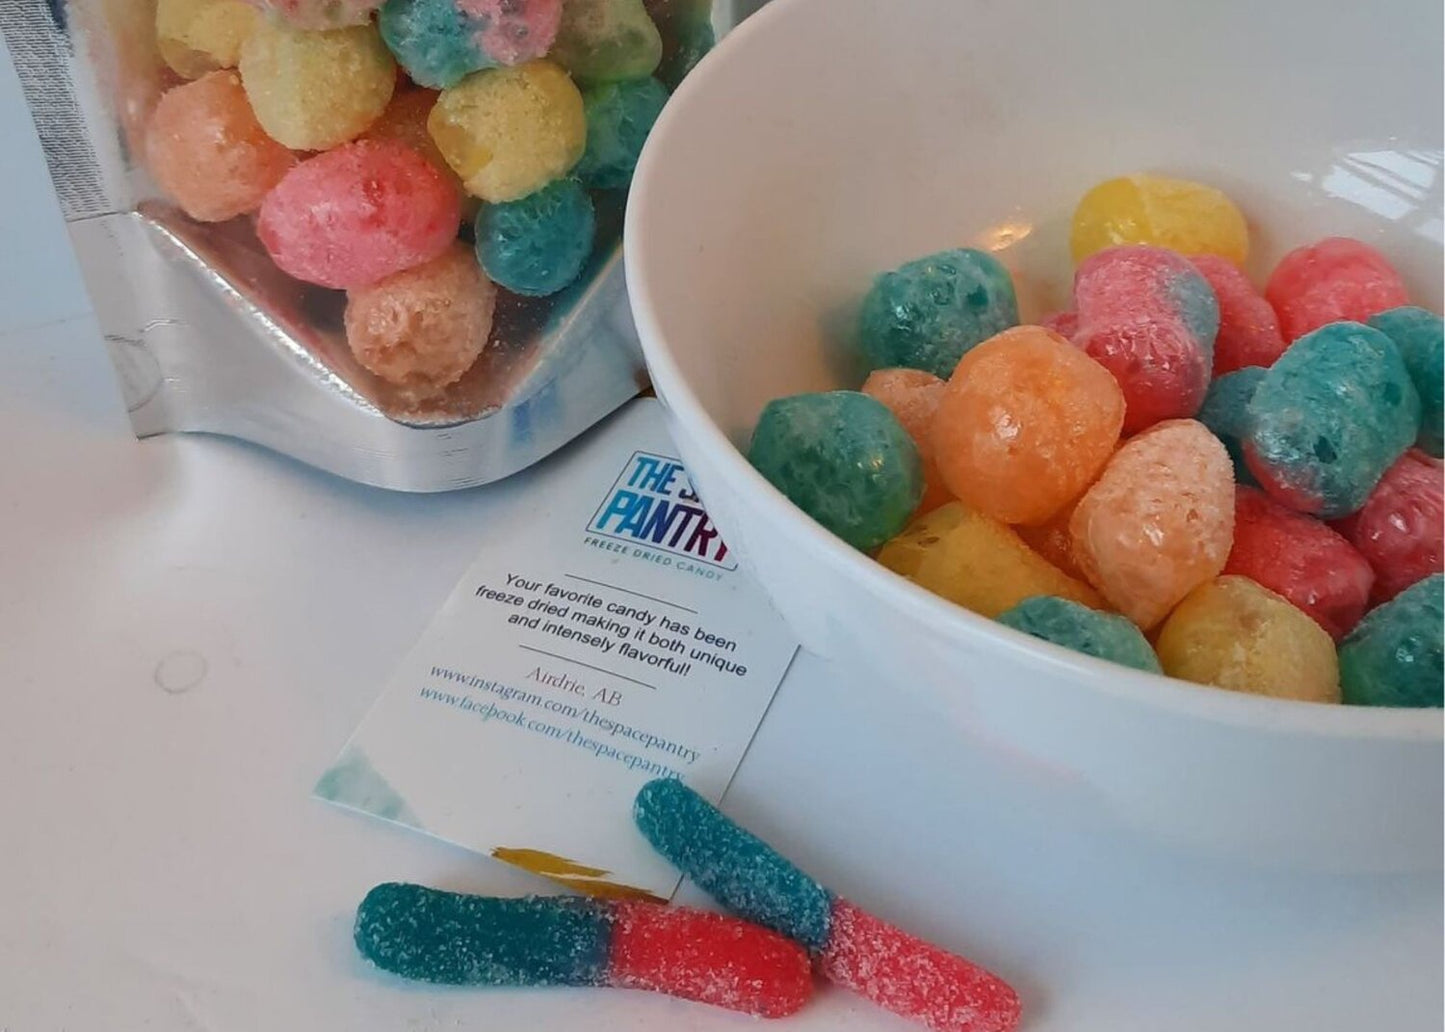 Freeze Dried Candy - Sour Worm Bites